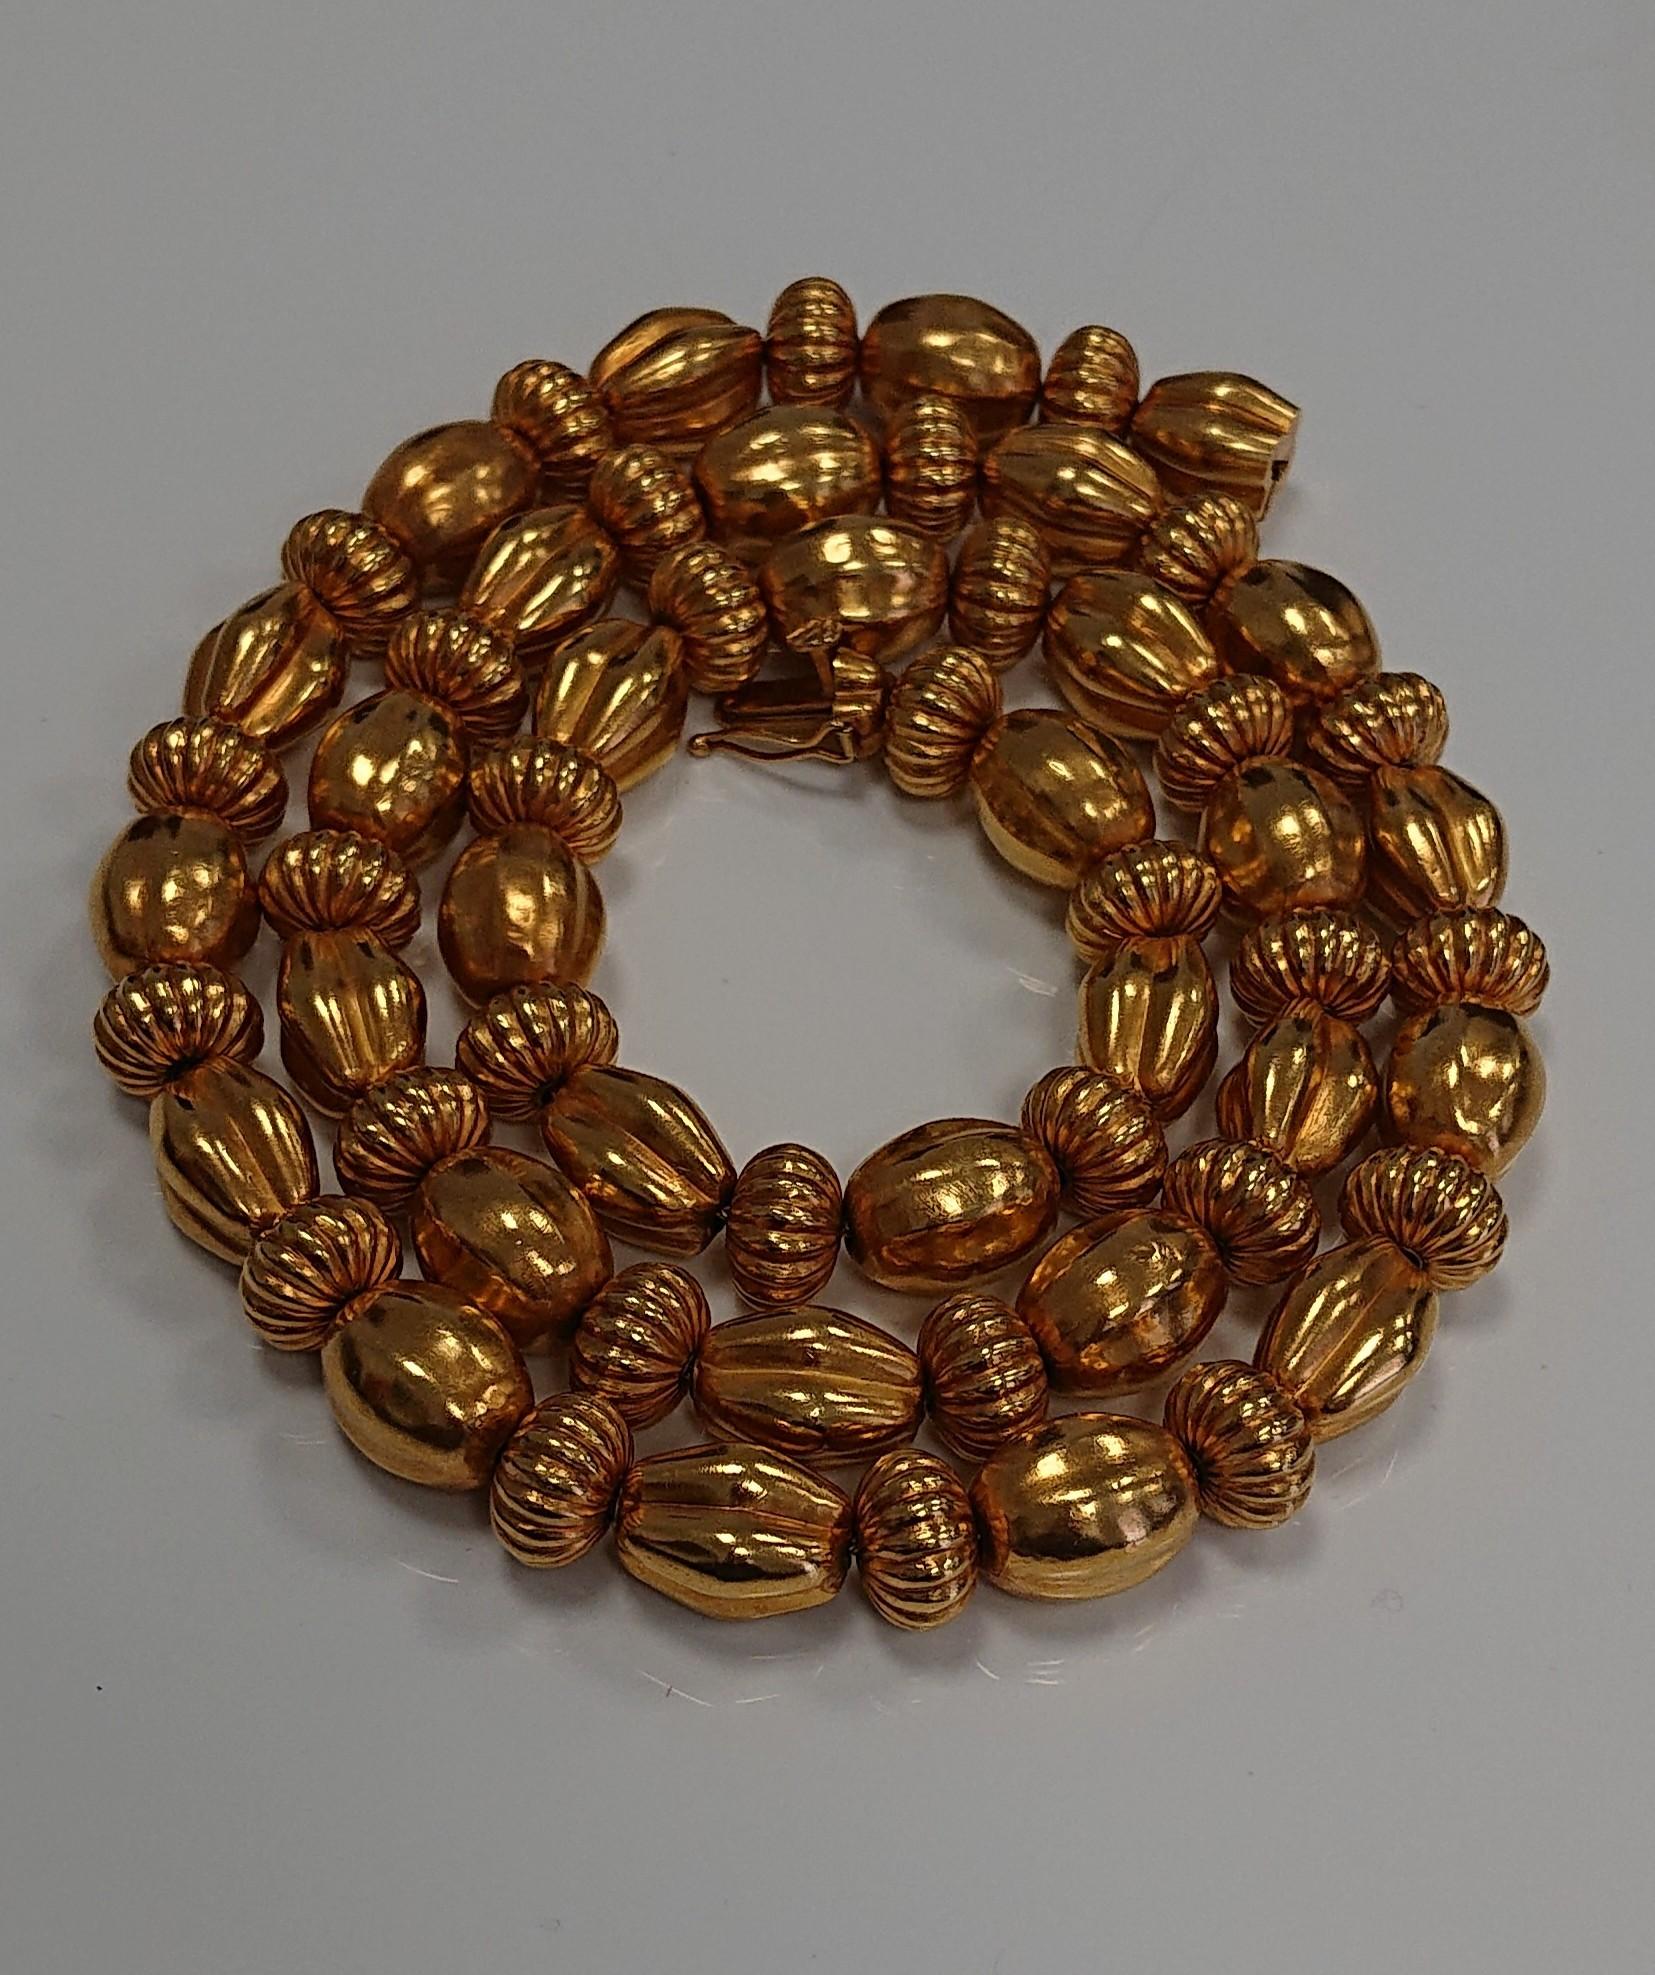 A Lalaounis 22 Carat Yellow Gold Minoan Fluted Bead Necklace. Circa 1970s. The alternating fluted gold beads with 22ct hand-woven chain. Stamped 